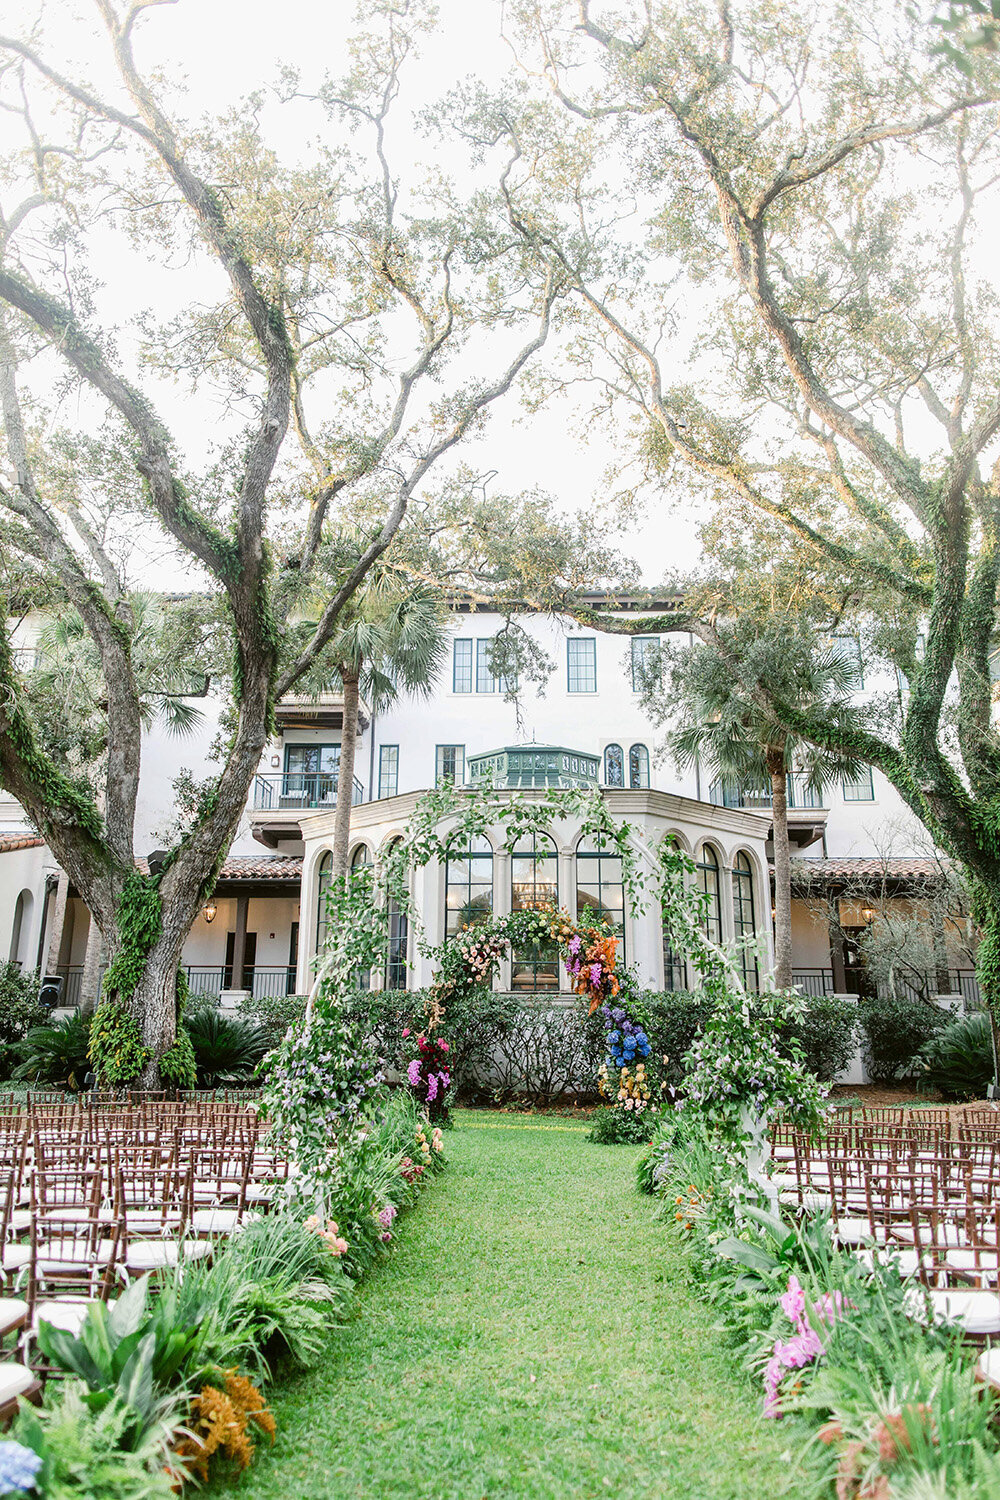 Ceremony space full of greens and flowers backdropped by a large mansion.